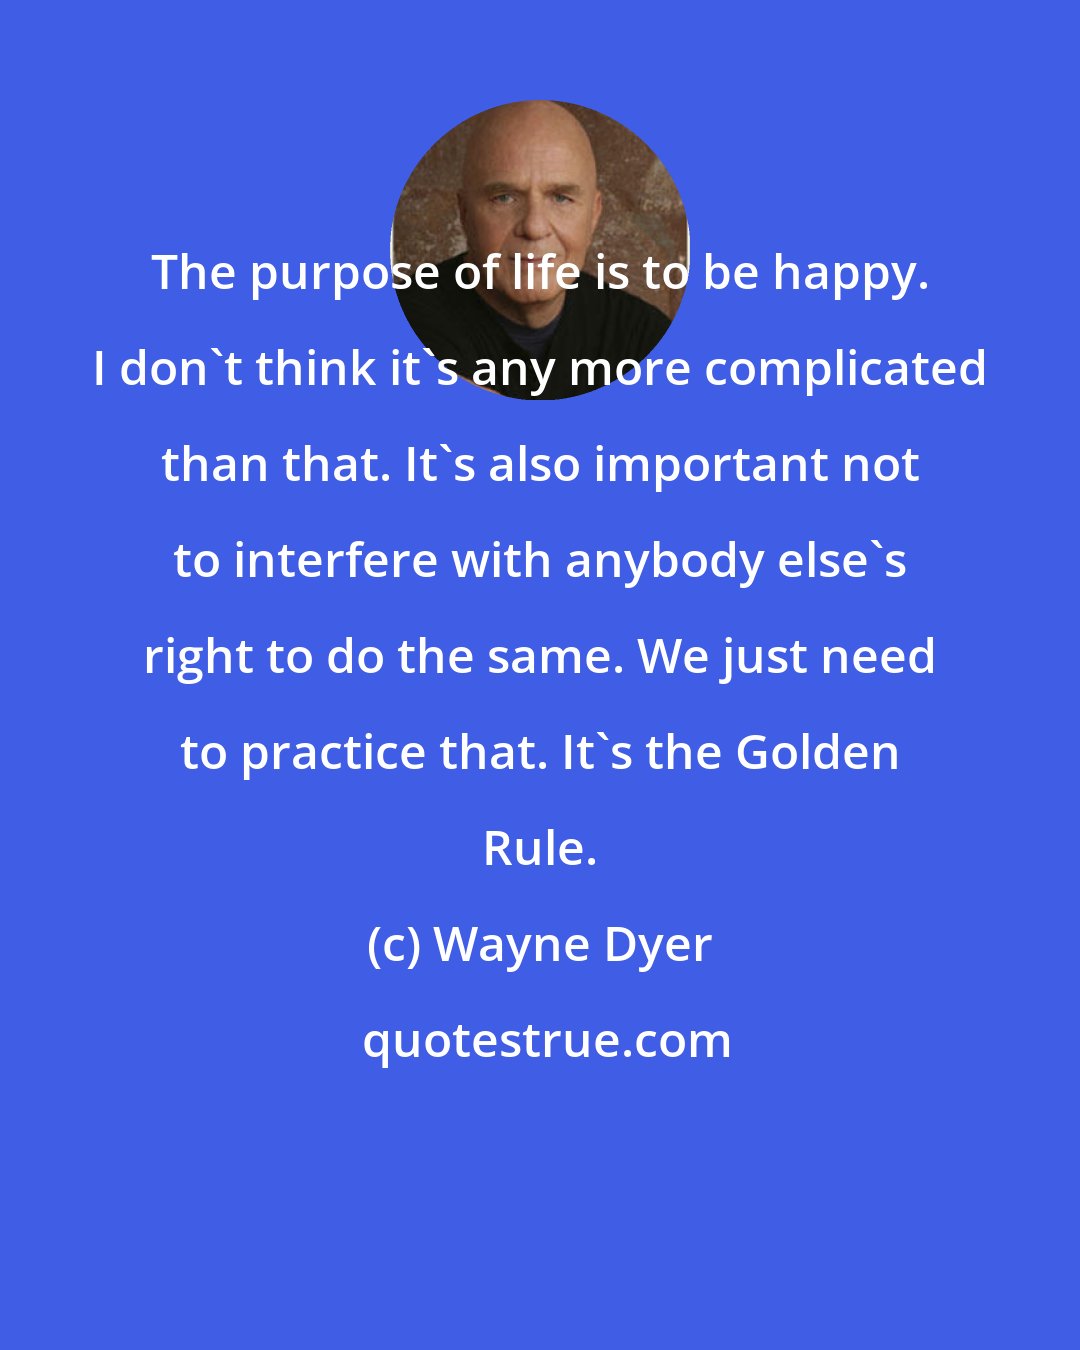 Wayne Dyer: The purpose of life is to be happy. I don't think it's any more complicated than that. It's also important not to interfere with anybody else's right to do the same. We just need to practice that. It's the Golden Rule.